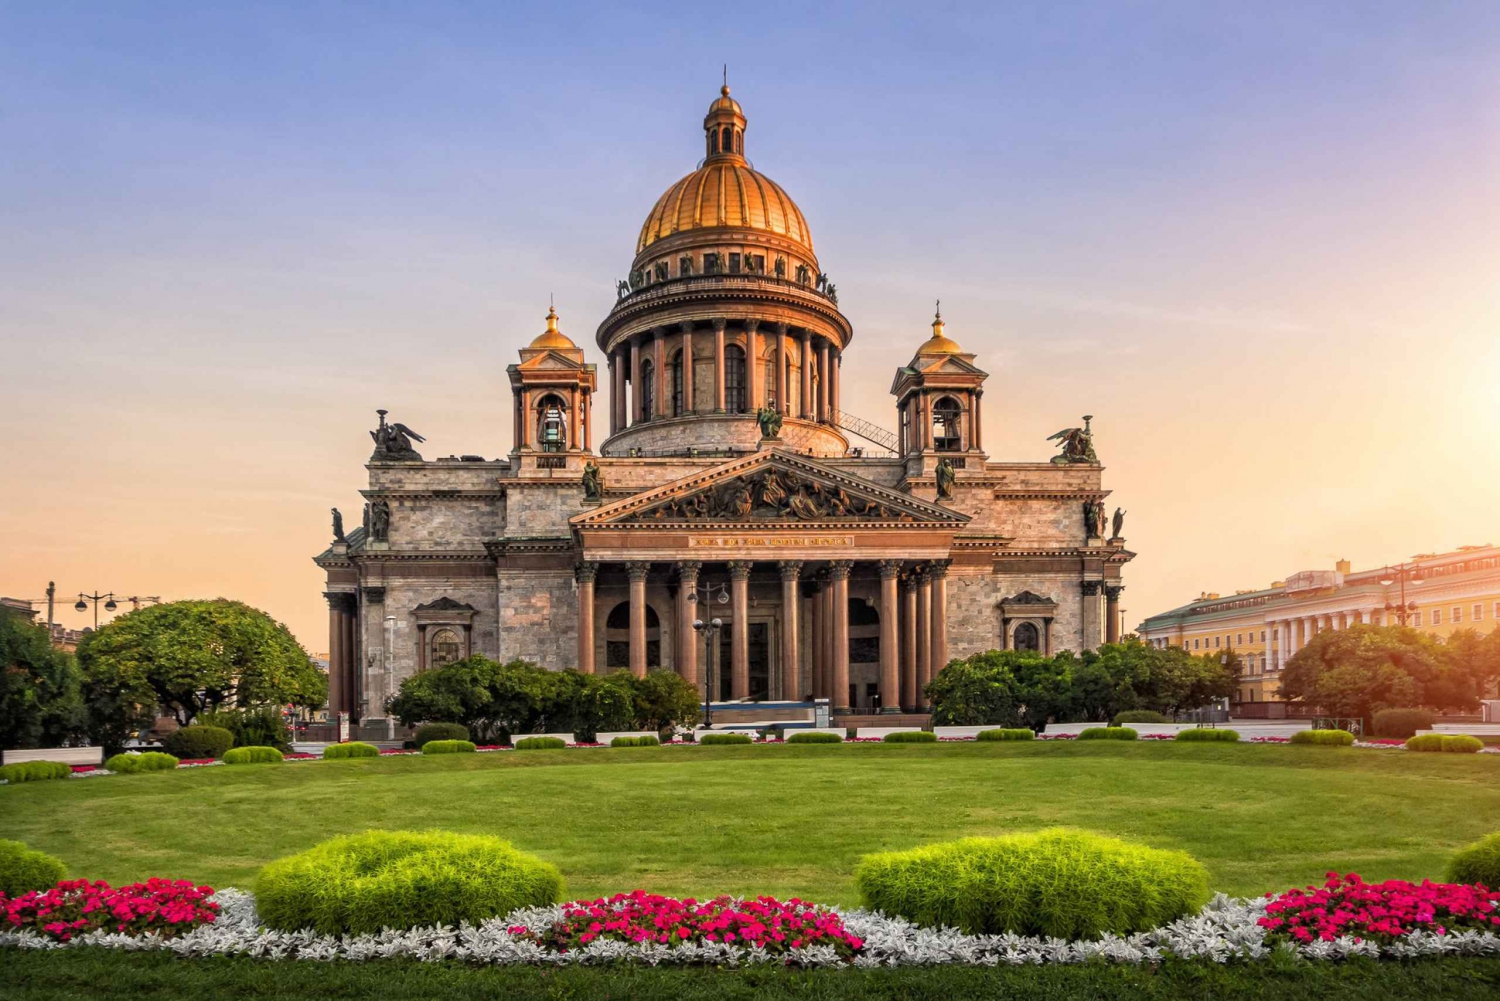 St Petersburg: Isaac's Cathedral Audio Guide & Colonnade